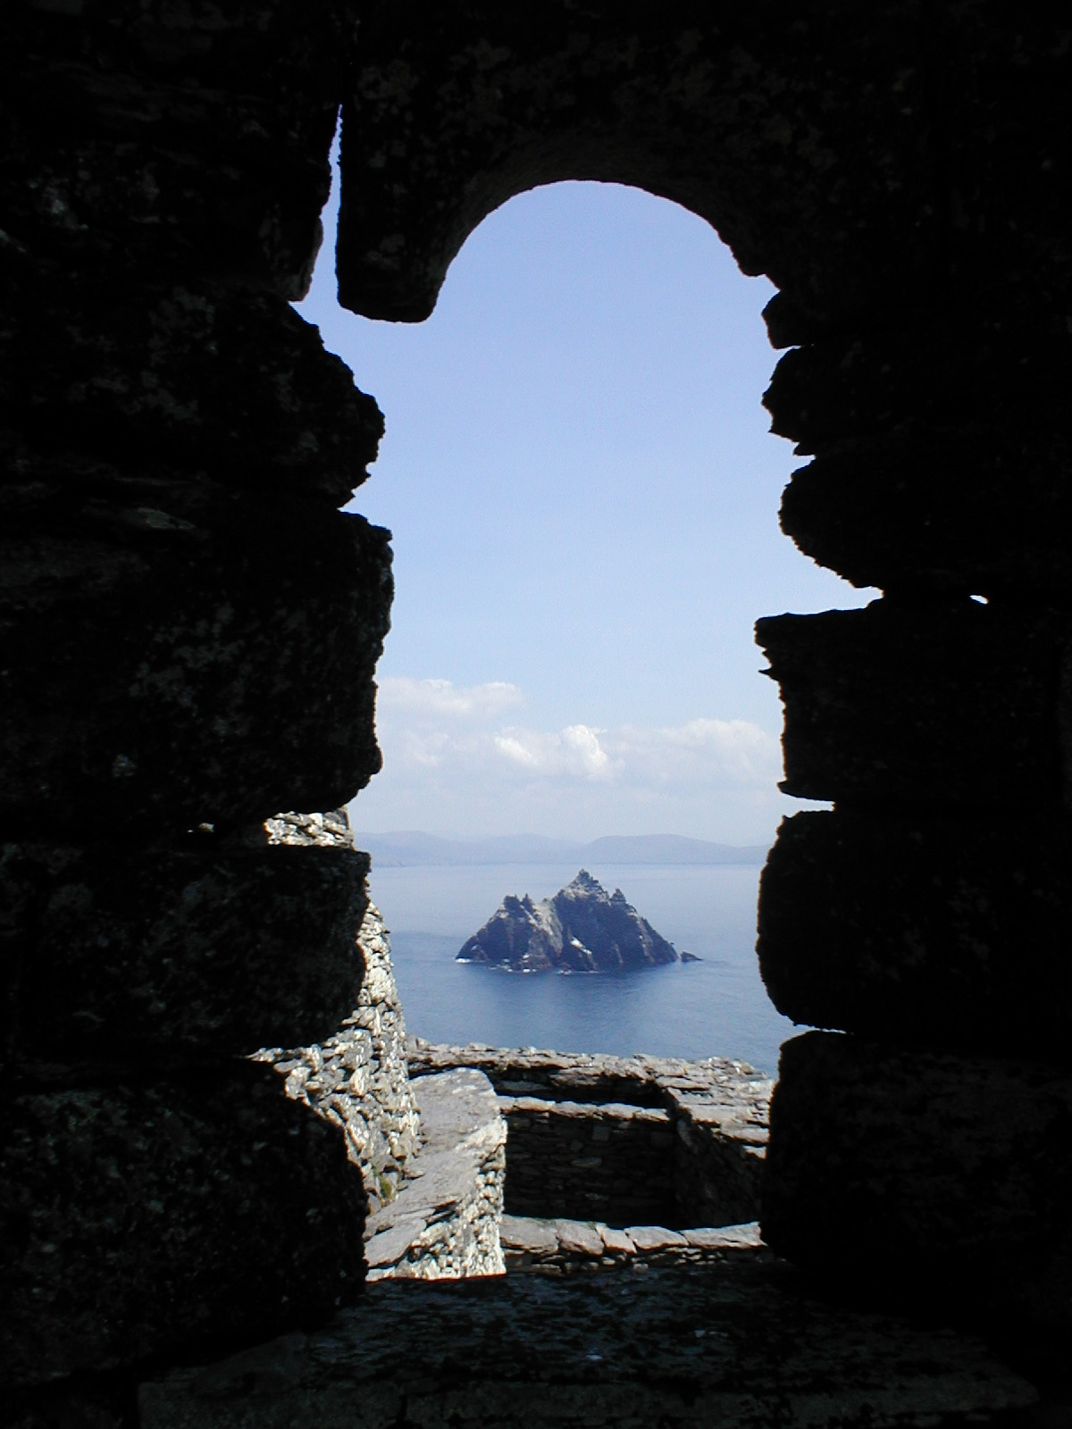 Little Skellig seen through a window of the hermitage of Skellig Michael